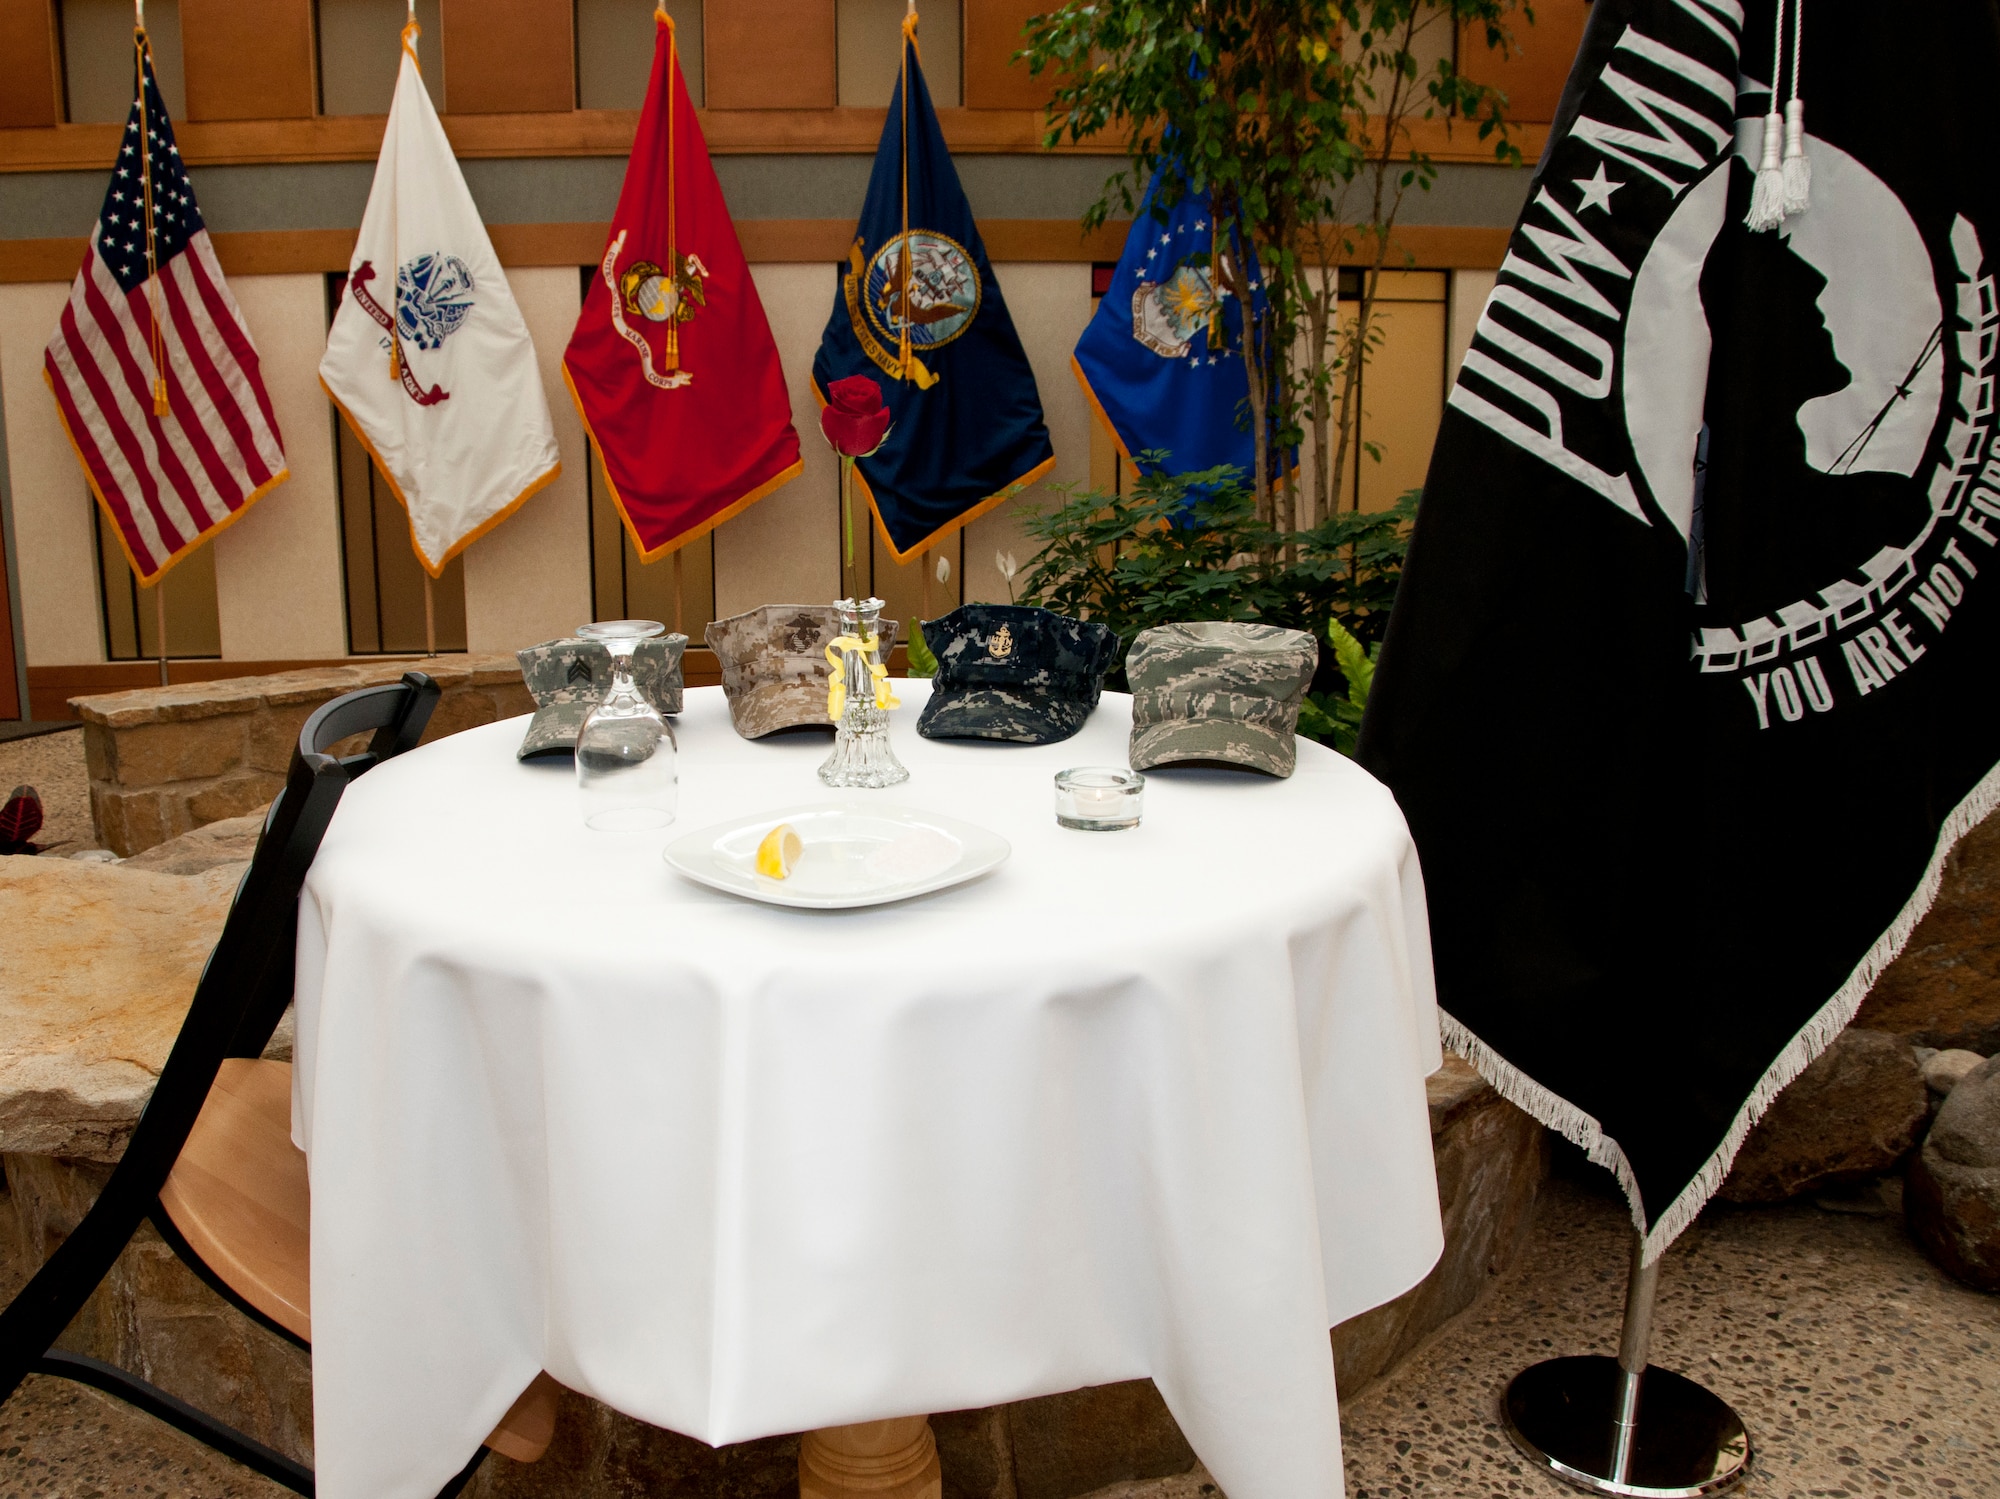 Four branches of the Armed Forces were represented during the Air Force Mortuary Affairs Operations' Prisoner of War Missing in Action ceremony Sept. 23 inside the Atrium. One member from the Army, Navy, Marines and Air Force placed their hat on the table to symbolize the sacrifices of each of the Armed Forces. (U.S. Air Force photo by Augustine G. Salazar)